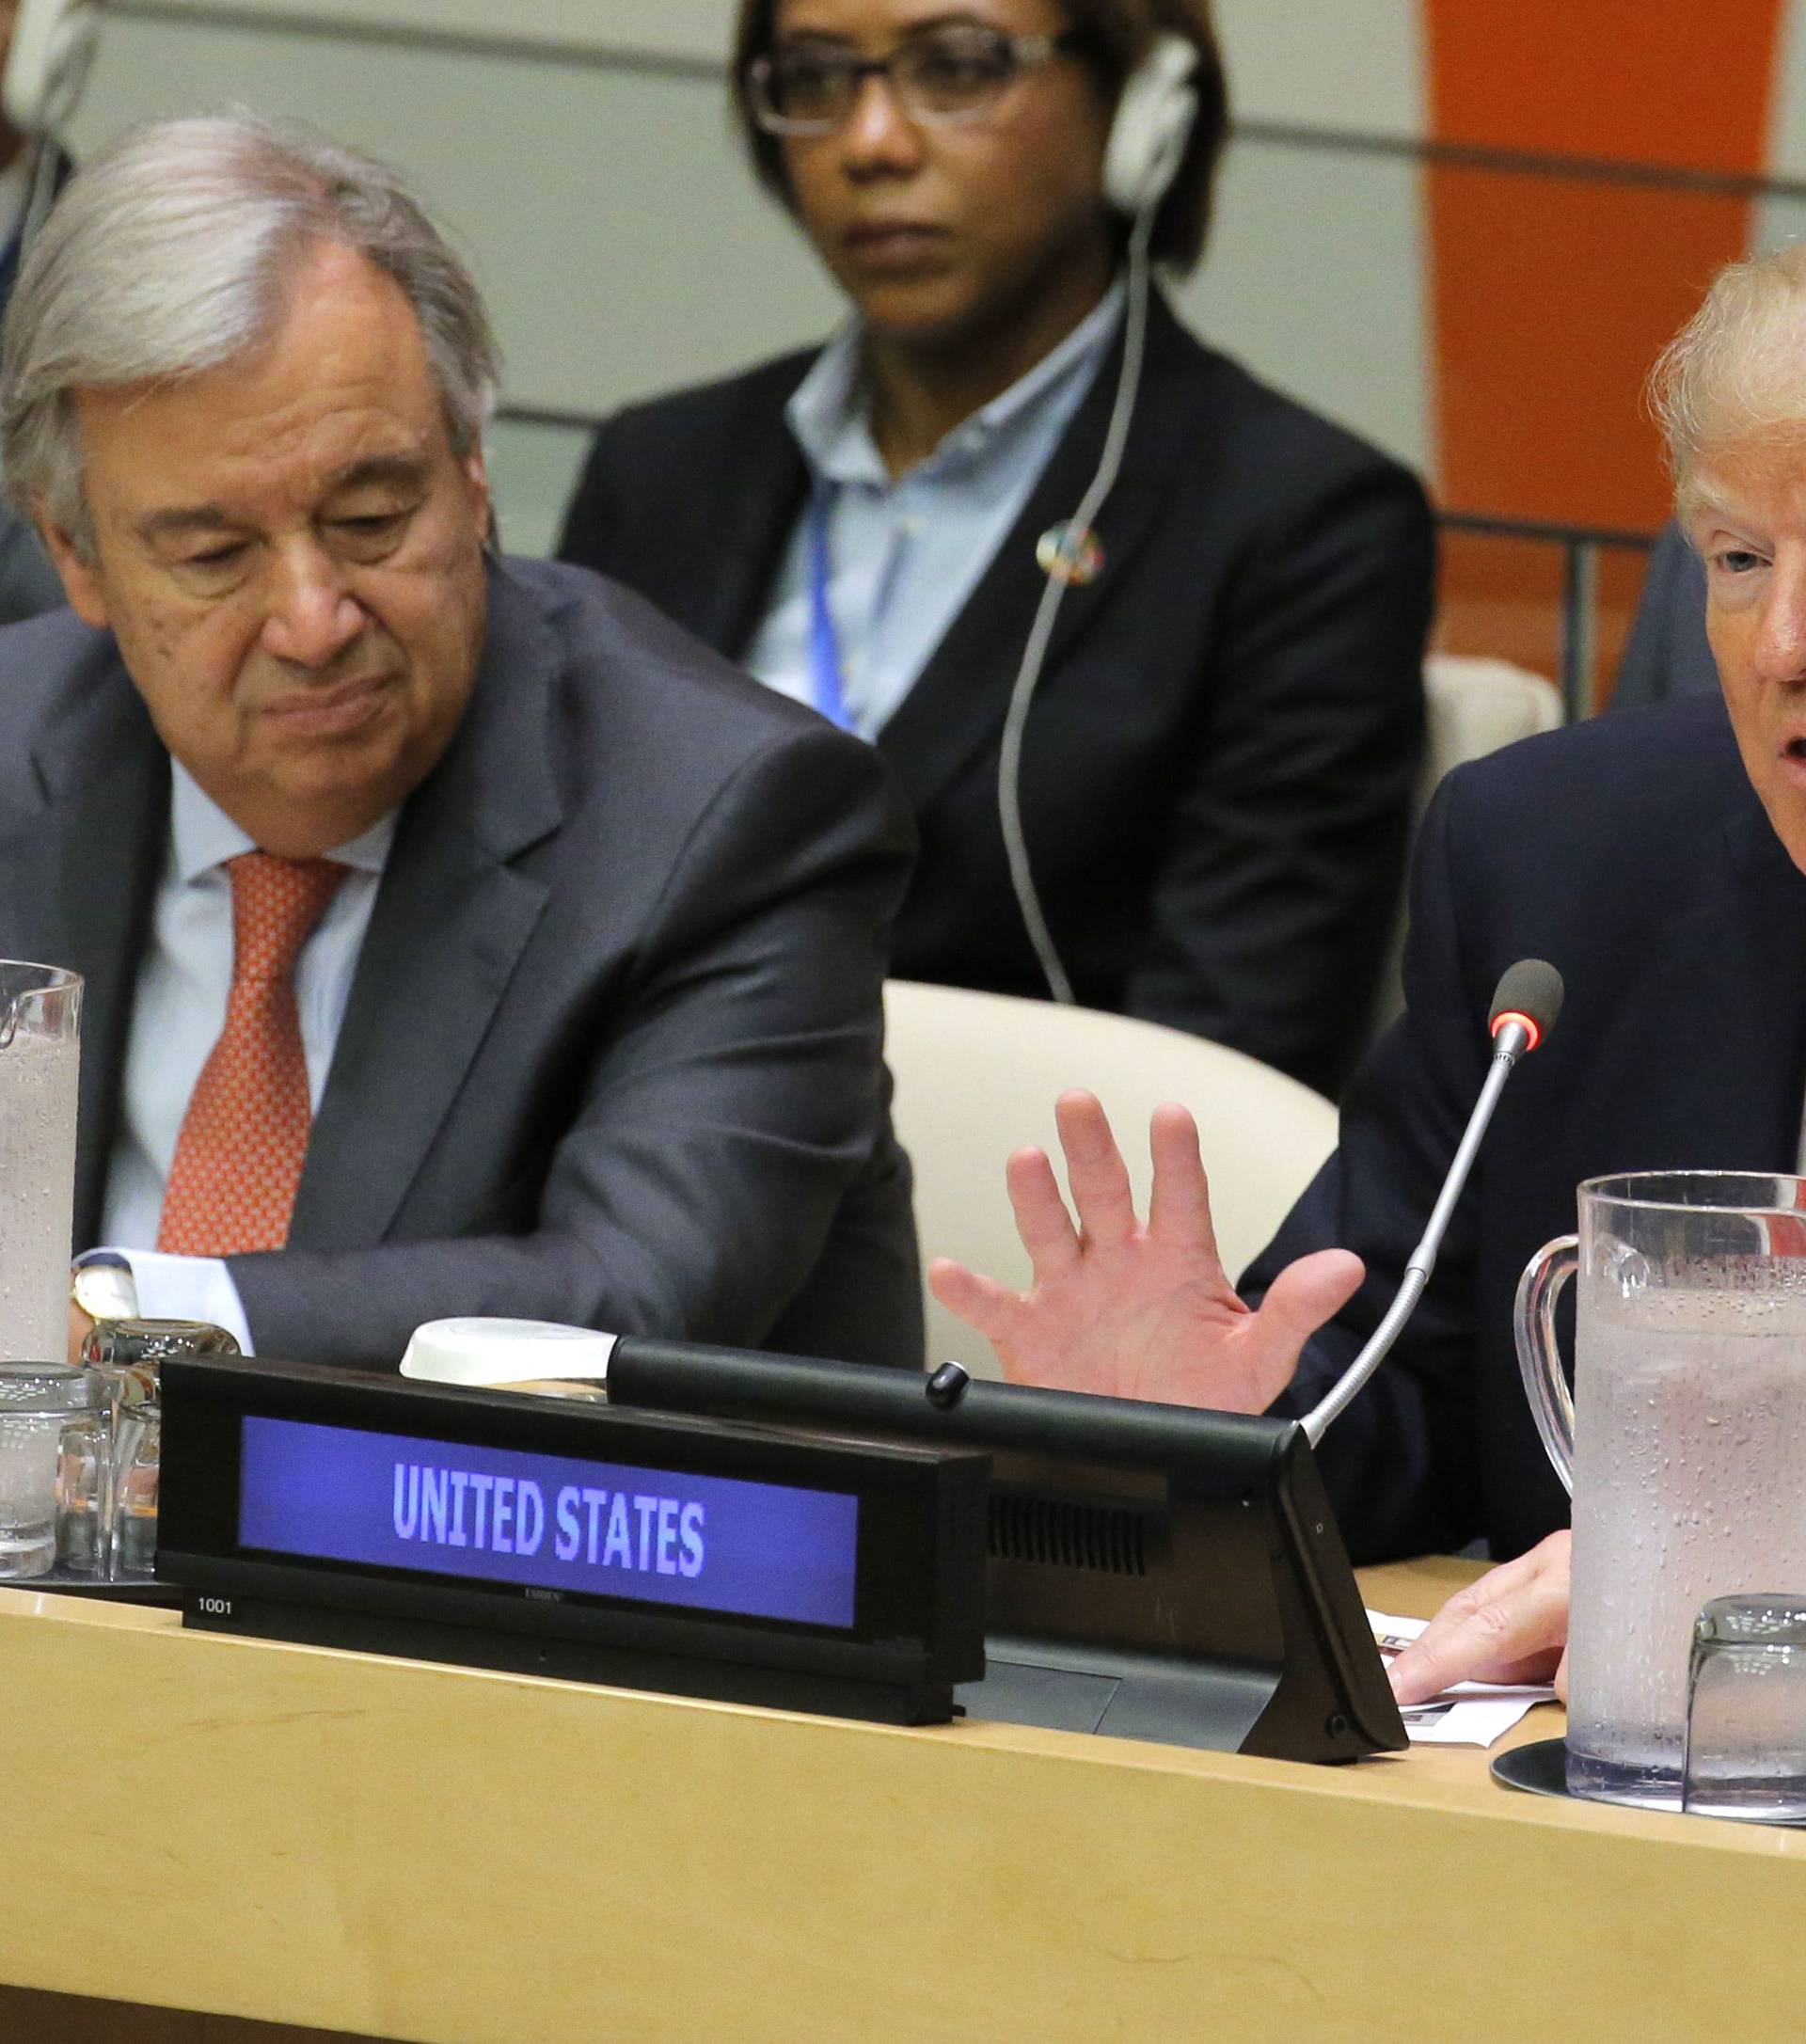 U.S. President Trump speaks during a session at UN Headquarters in New York